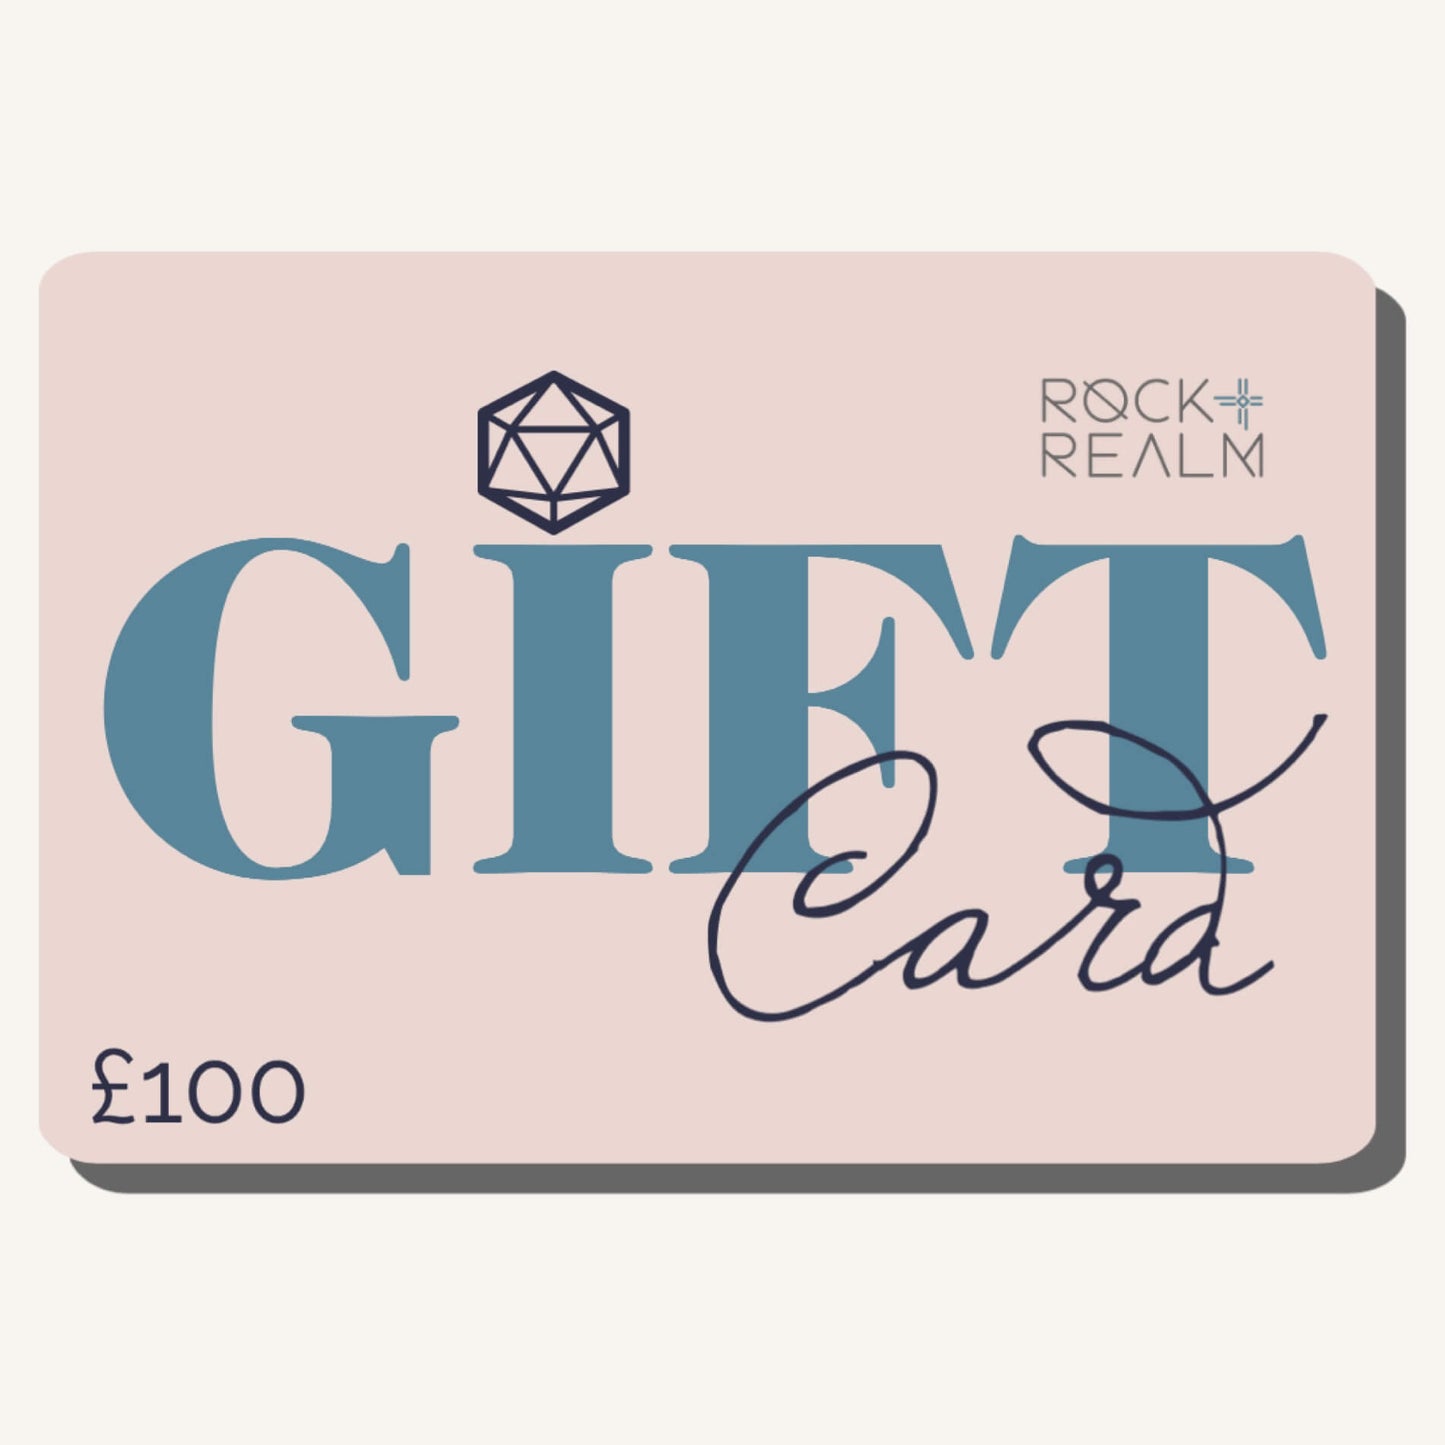 rock and realm £100 gift card picture in pink and blue